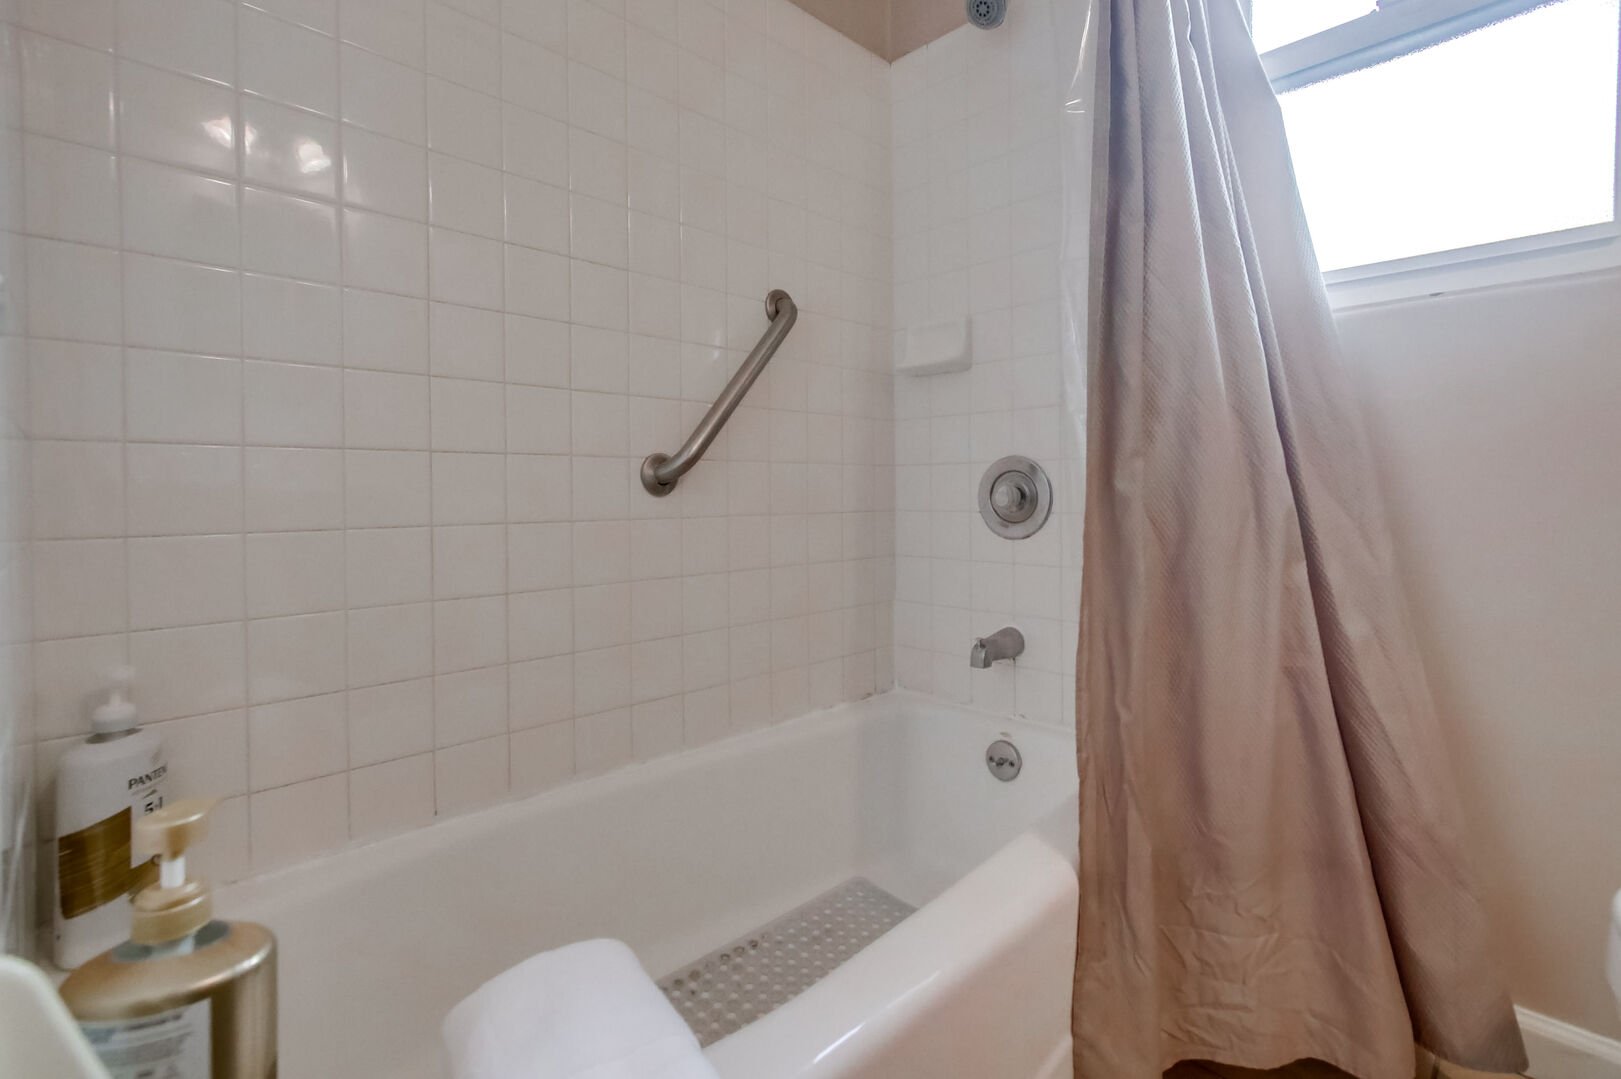 Shower-tub with access bar